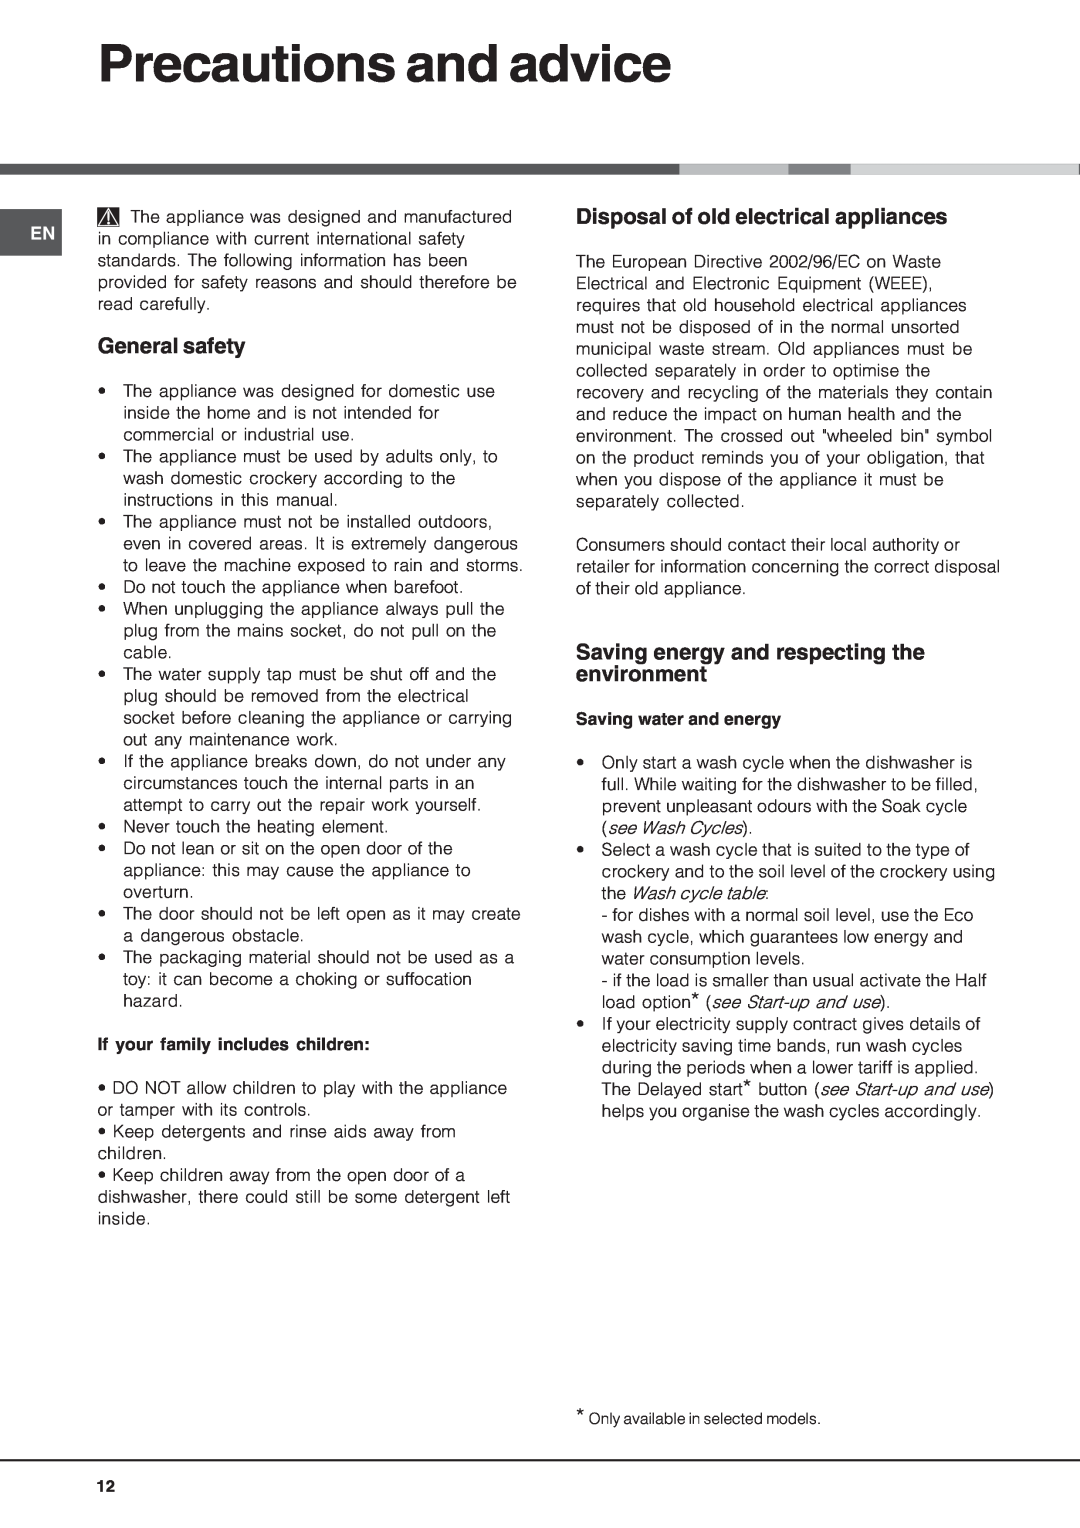 Hotpoint LFT04 manual Precautions and advice, General safety, Disposal of old electrical appliances 